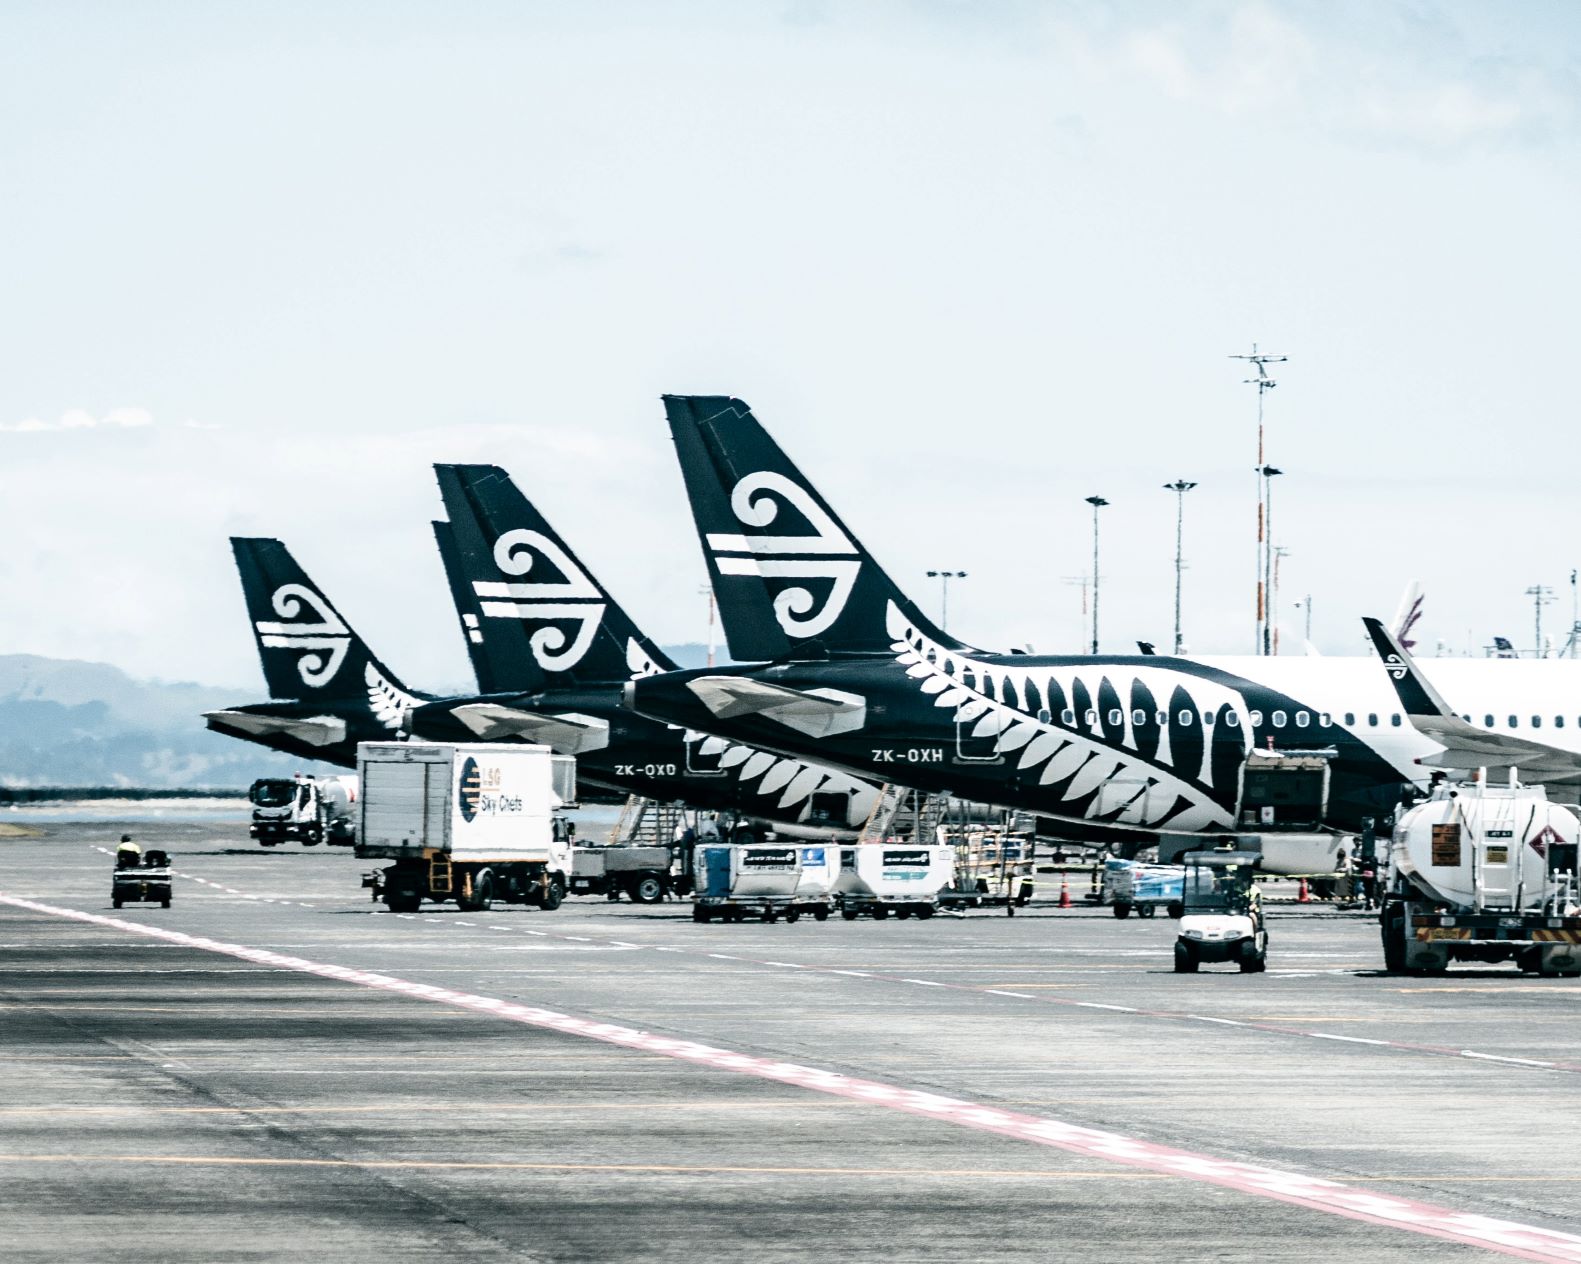 Hedging holds fuel price high for Air New Zealand